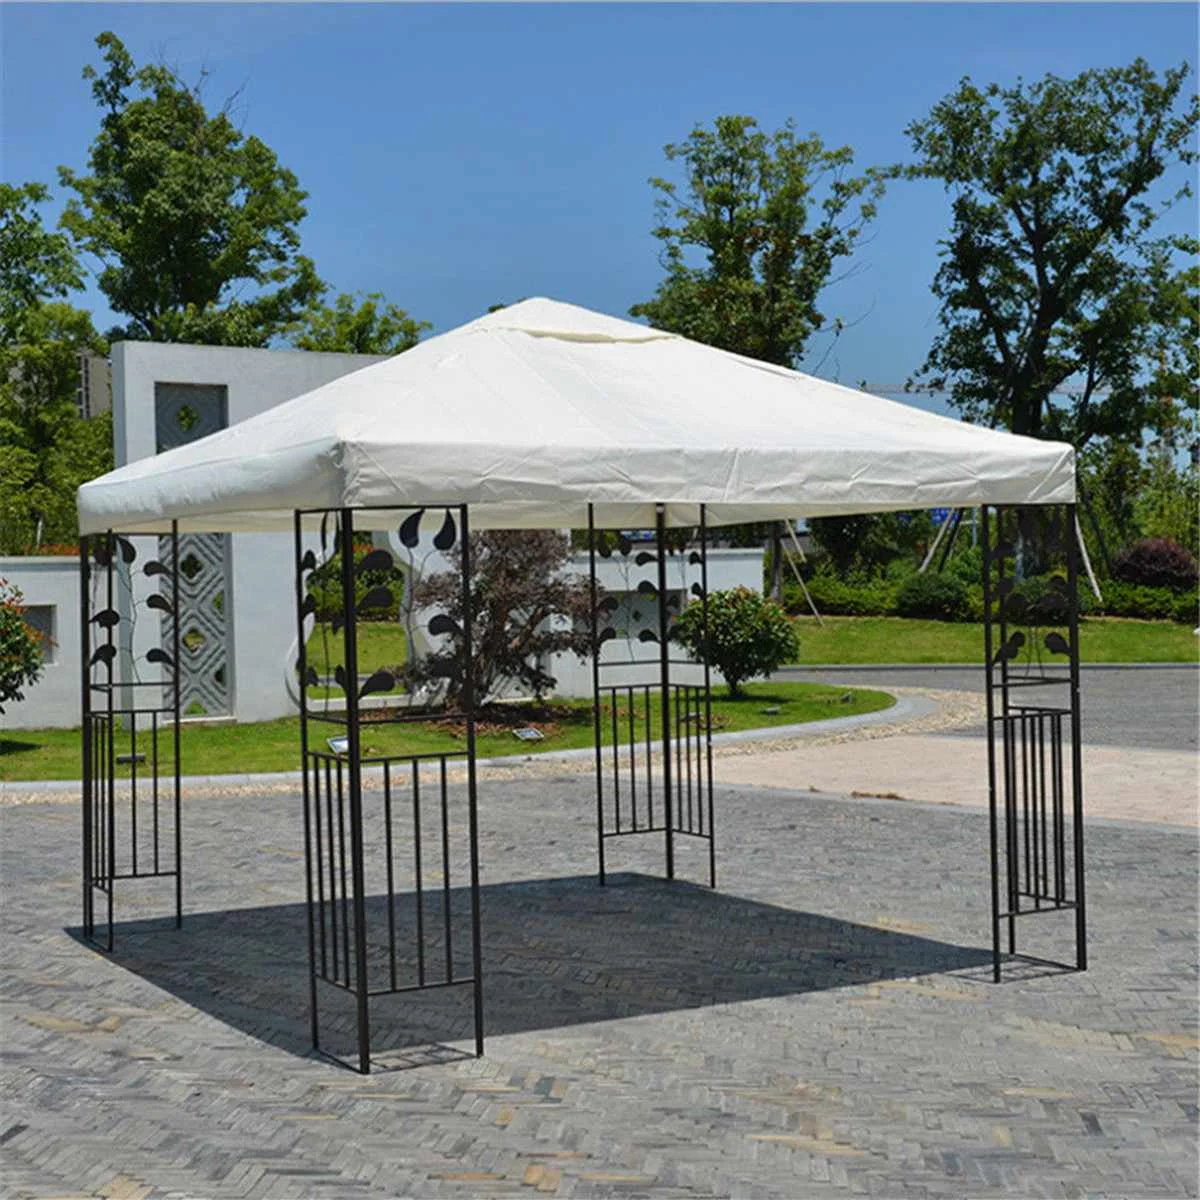 

3x3M 300D Canvas Camping Hiking Sun Shelter Outdoor Tent Canopy Top Roof Cover Patio Sun Shade Cloth Shade Shelter Replace Part